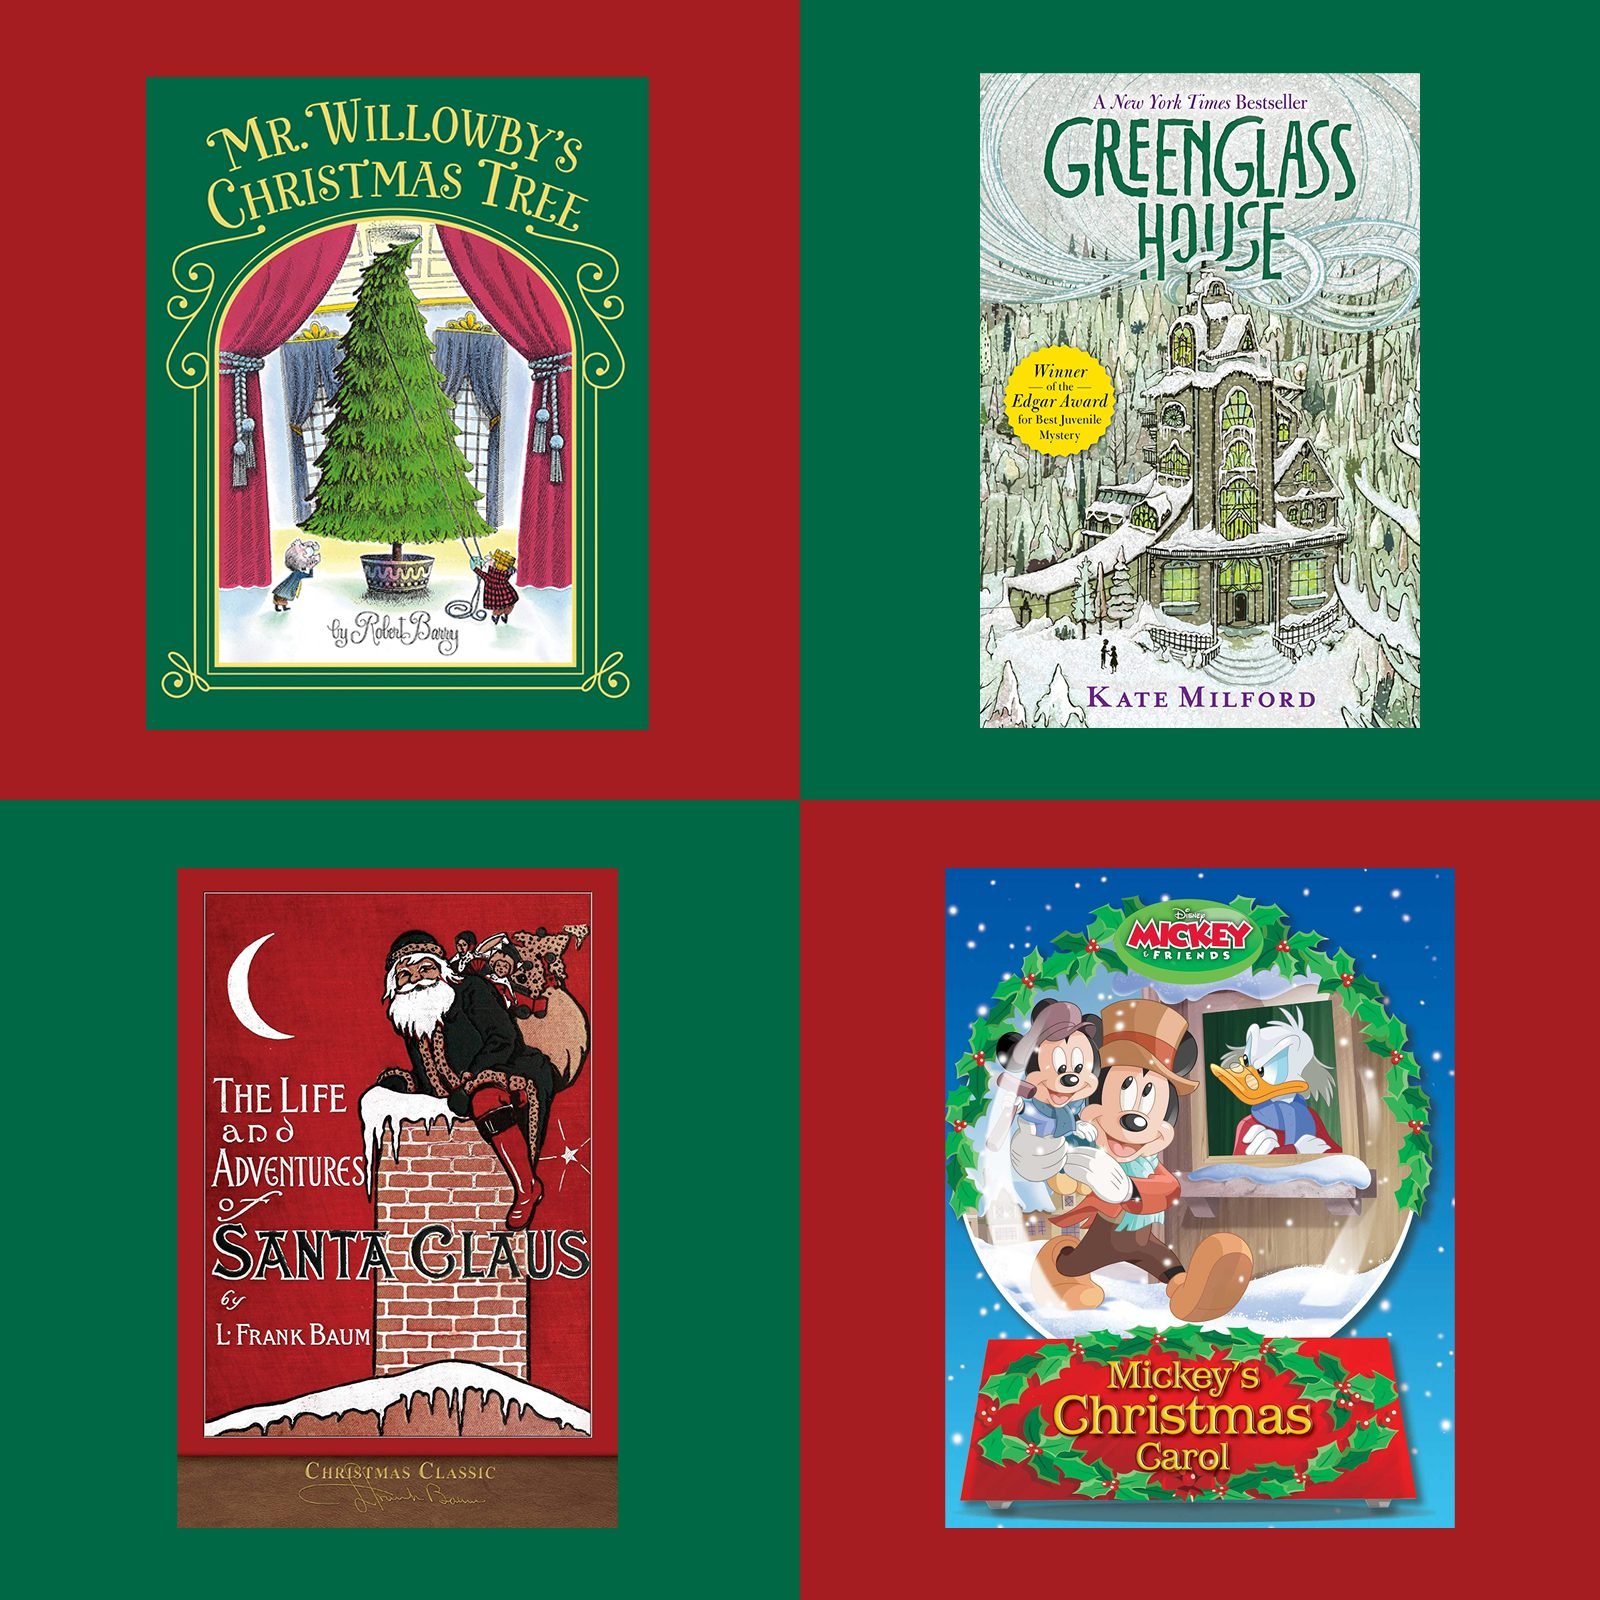 40 Best Christmas Books for Kids That Bring Magic to the Holidays